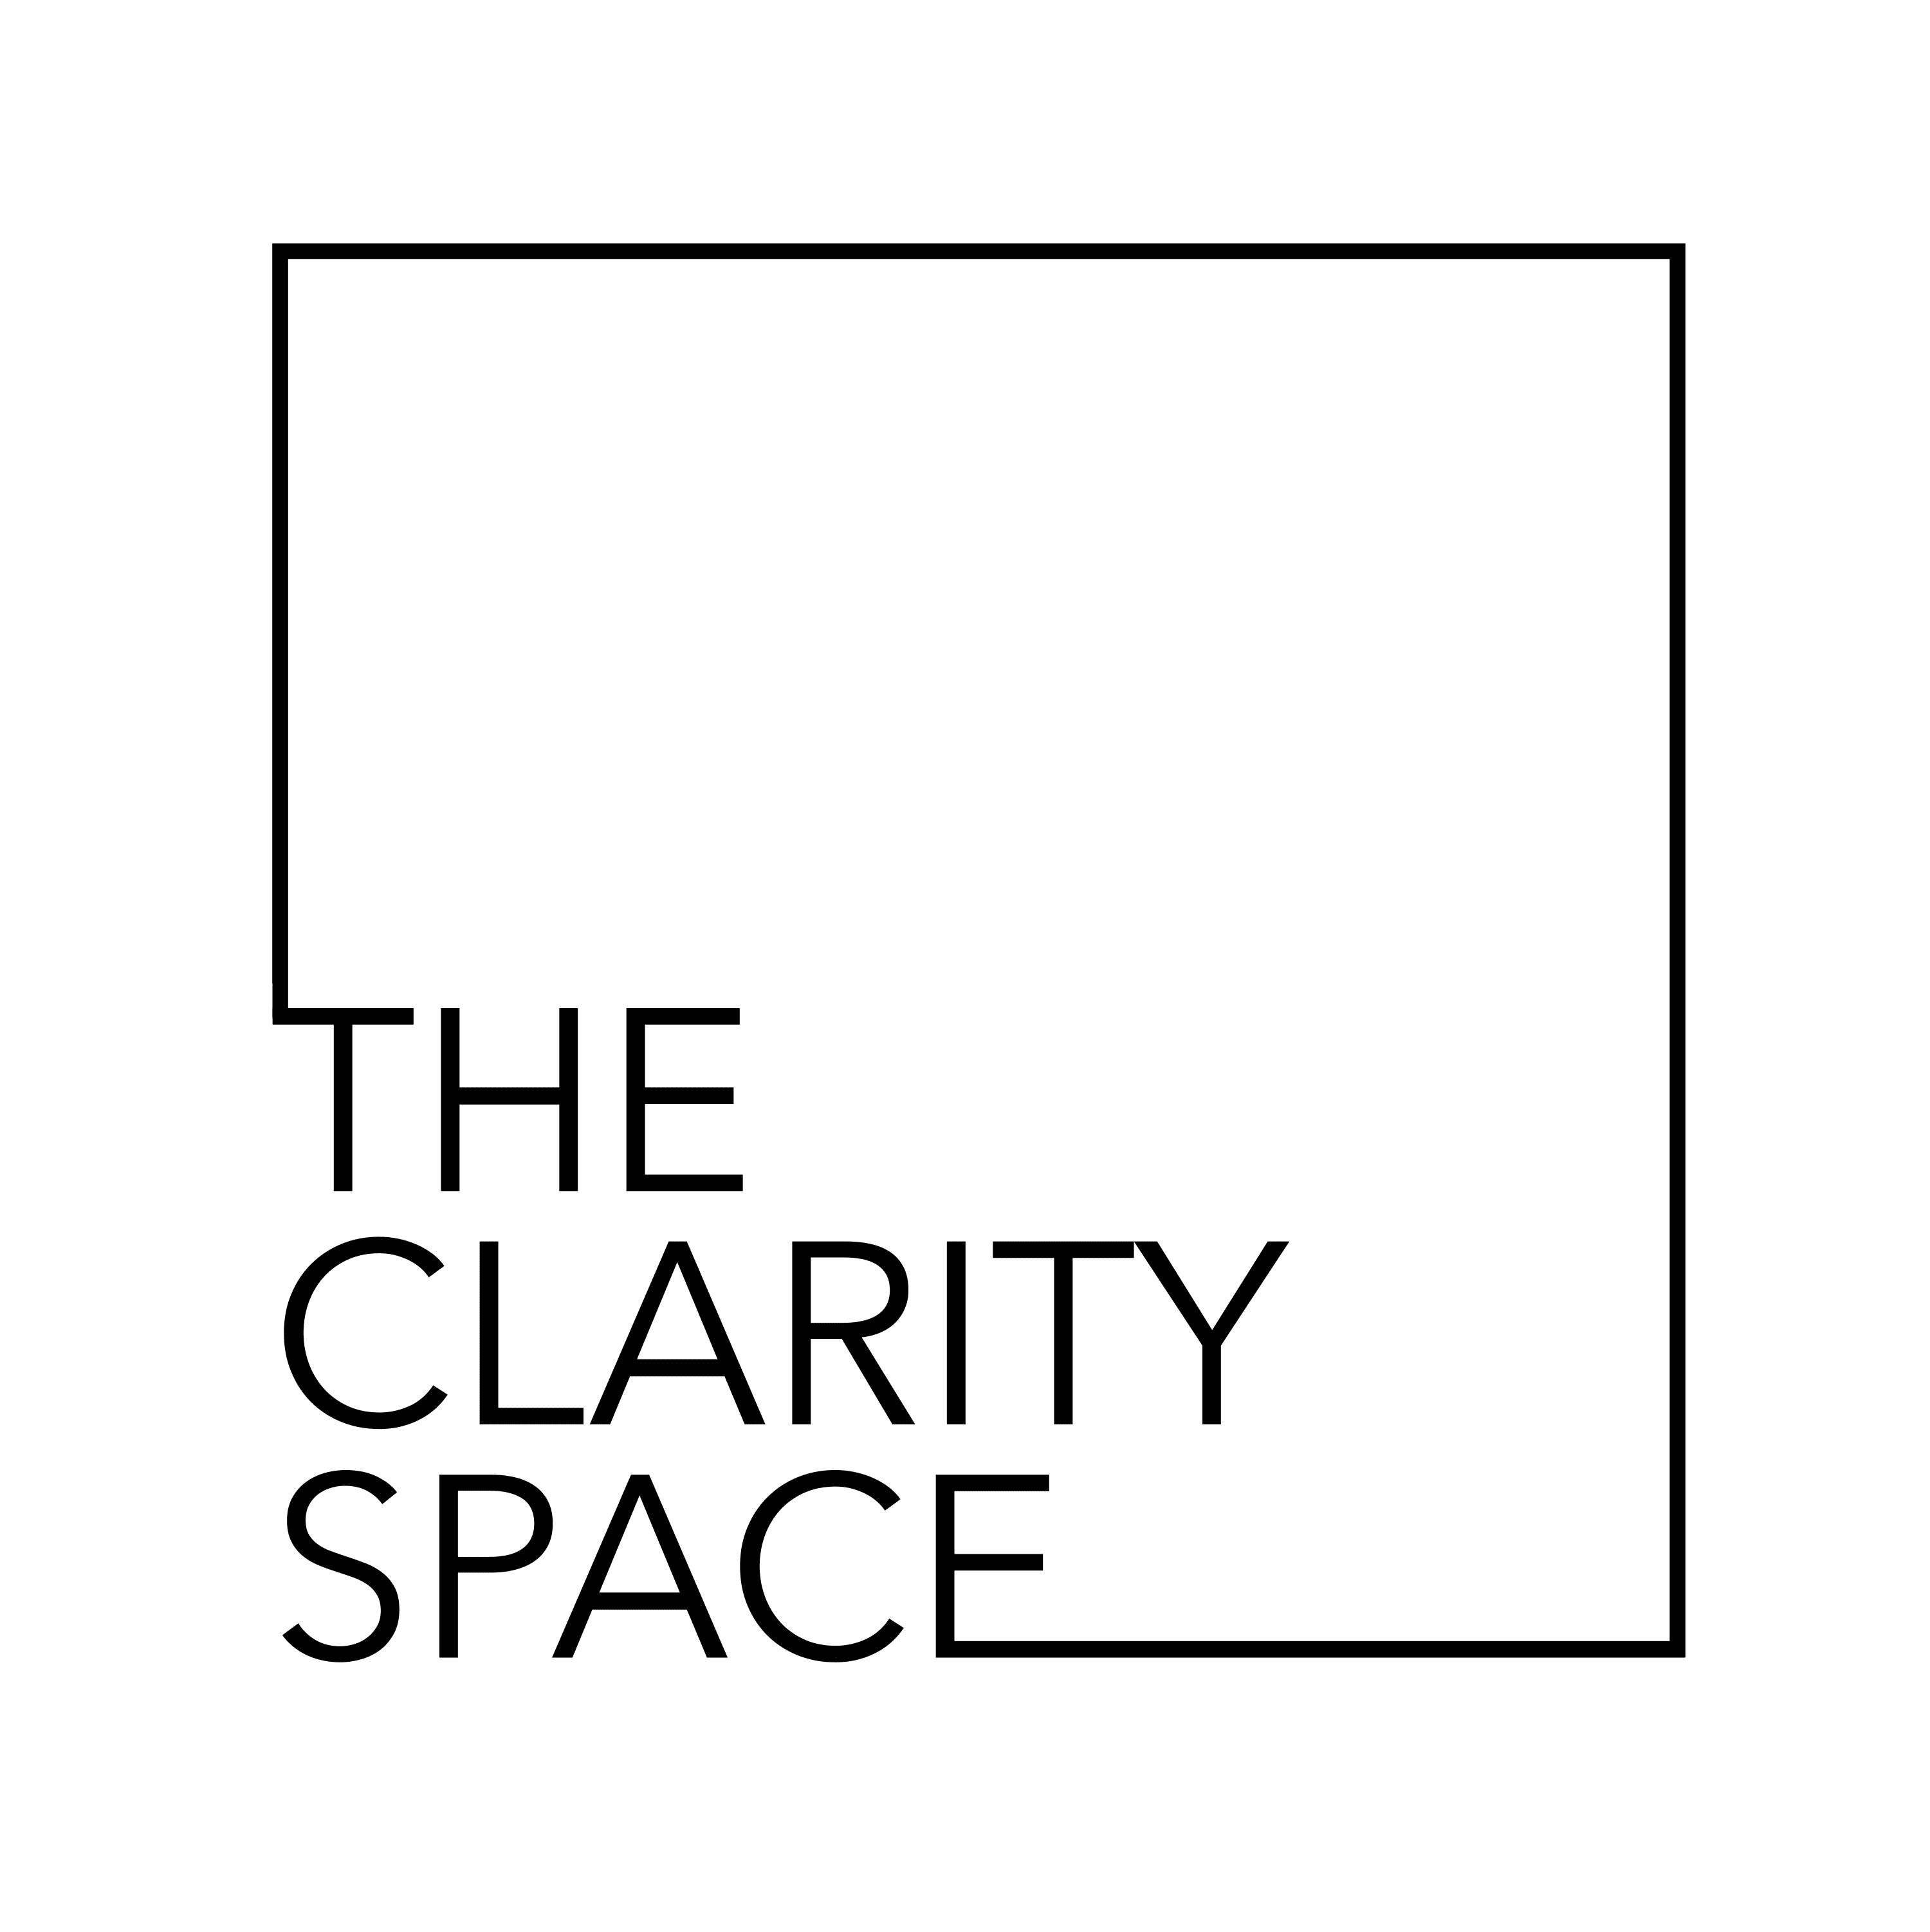 The Clarity Space